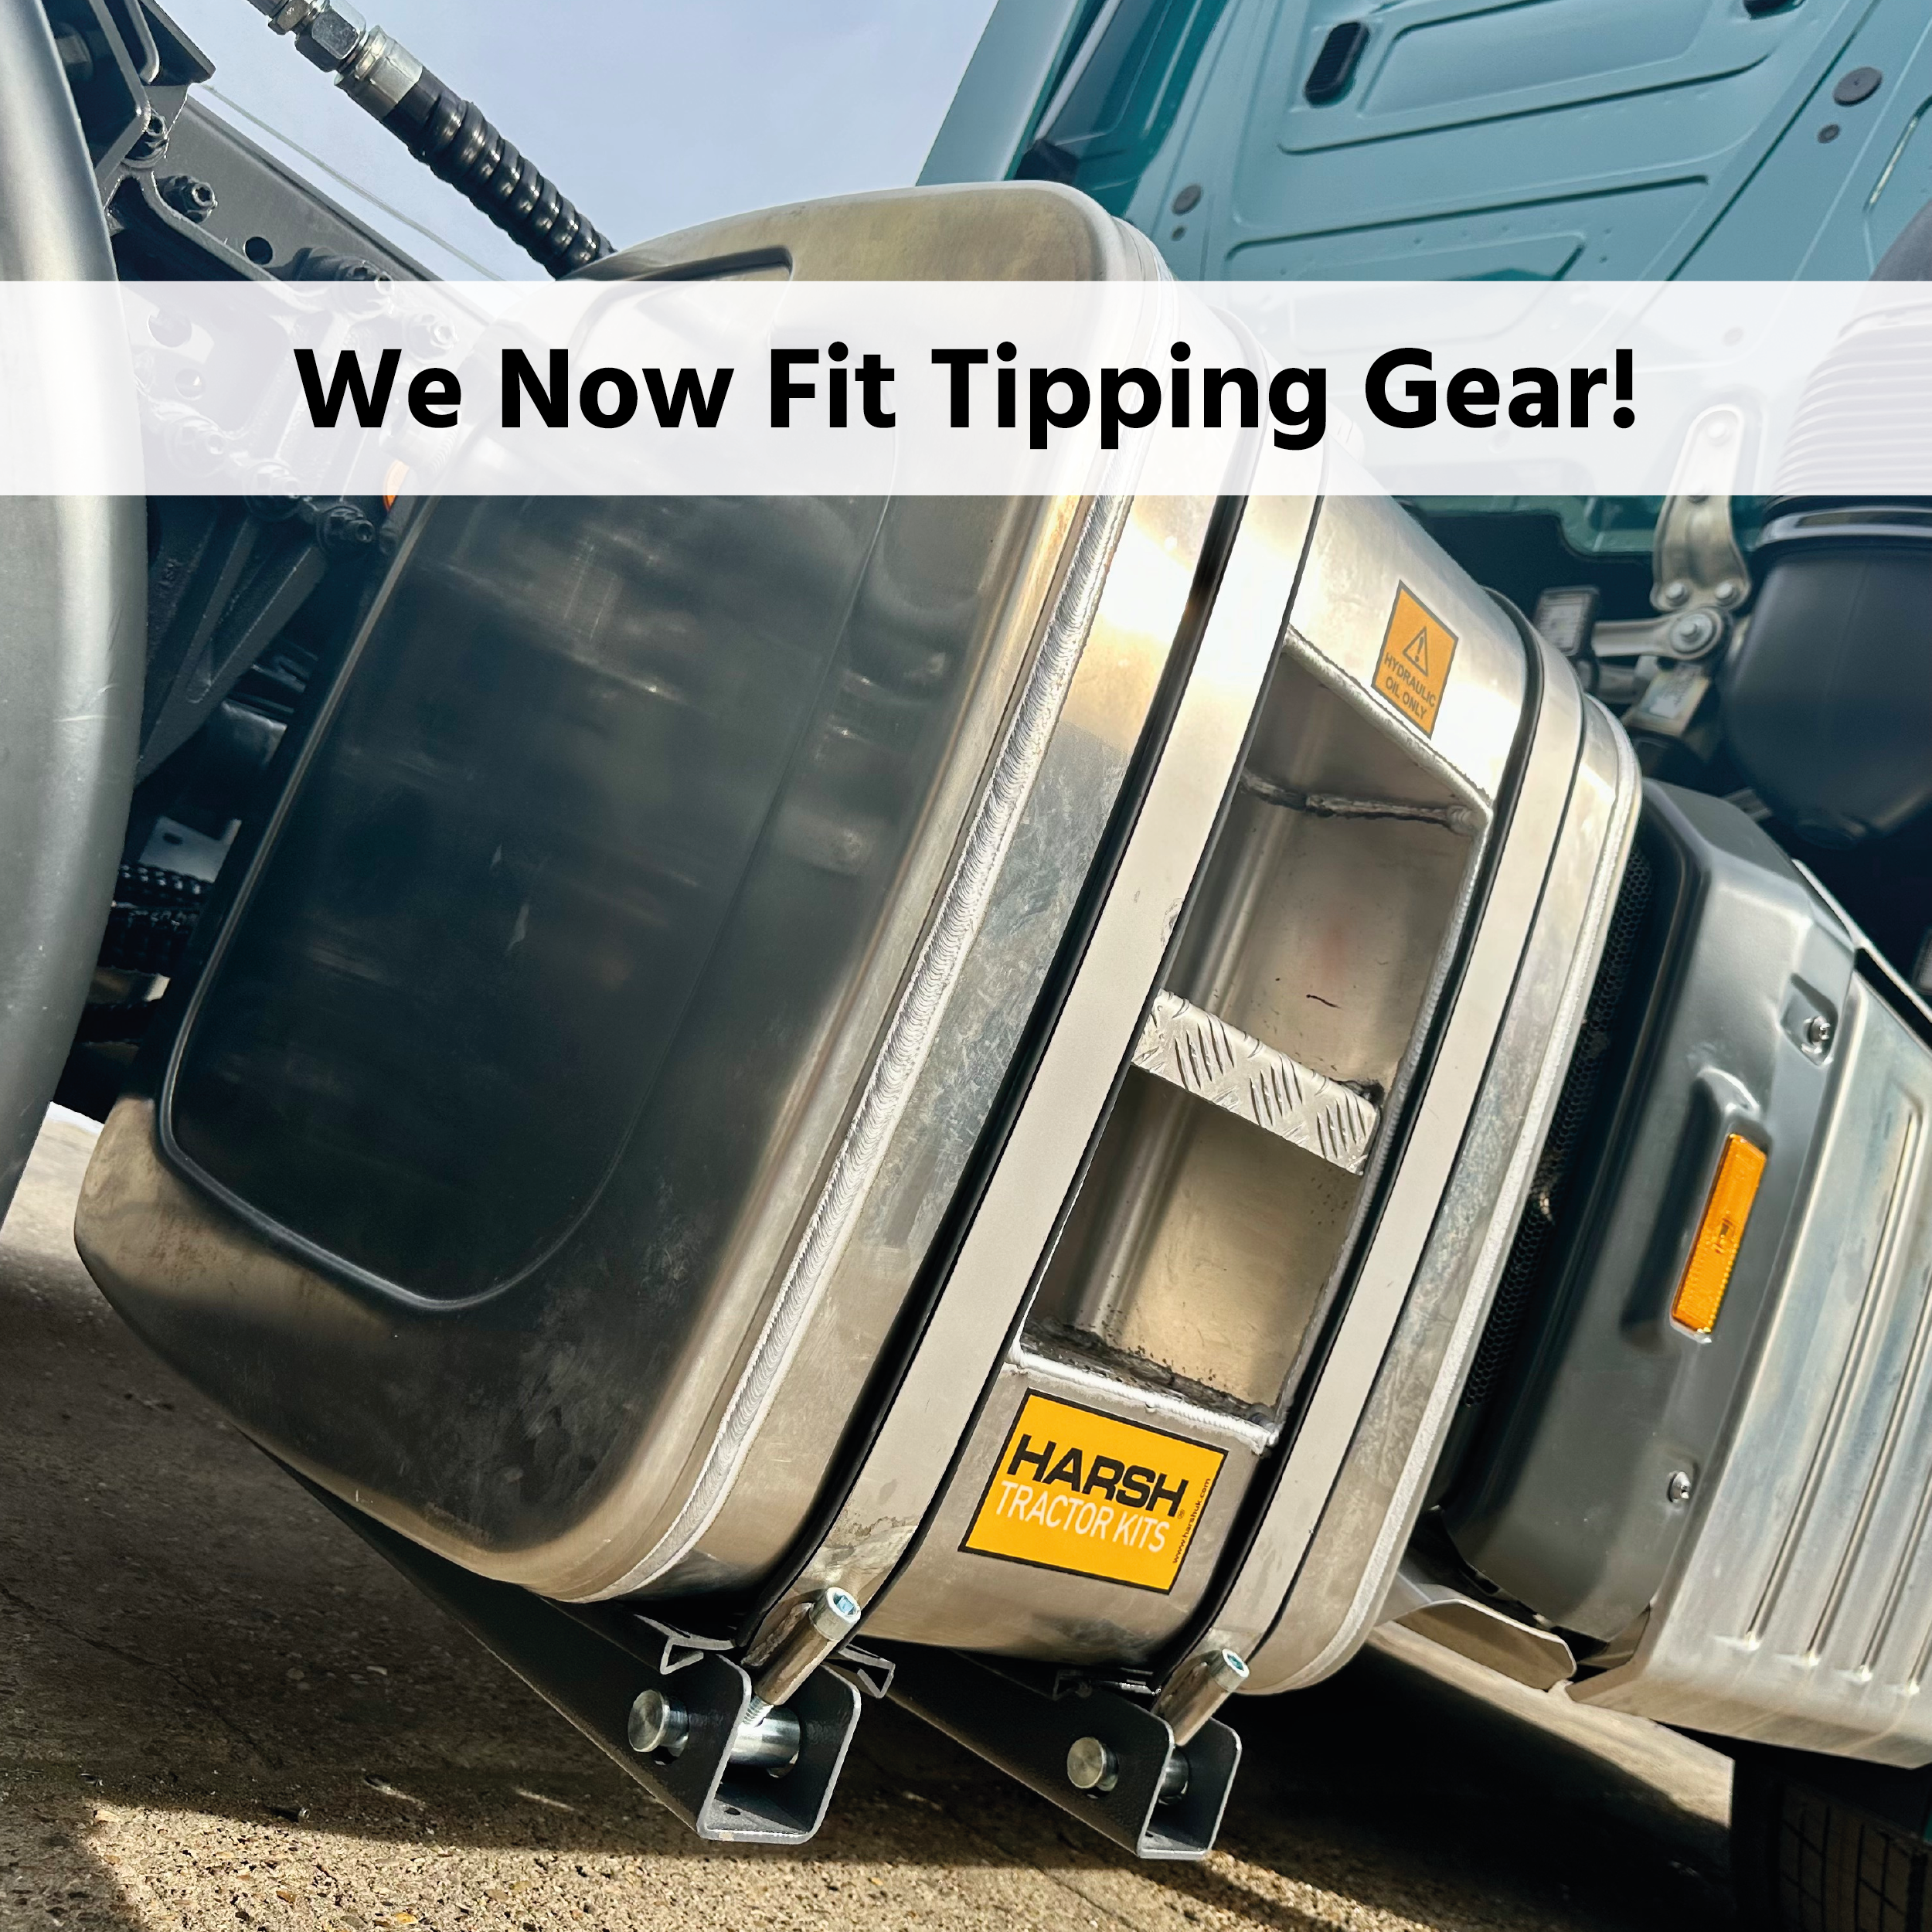 We Now Fit Tipping Gear!